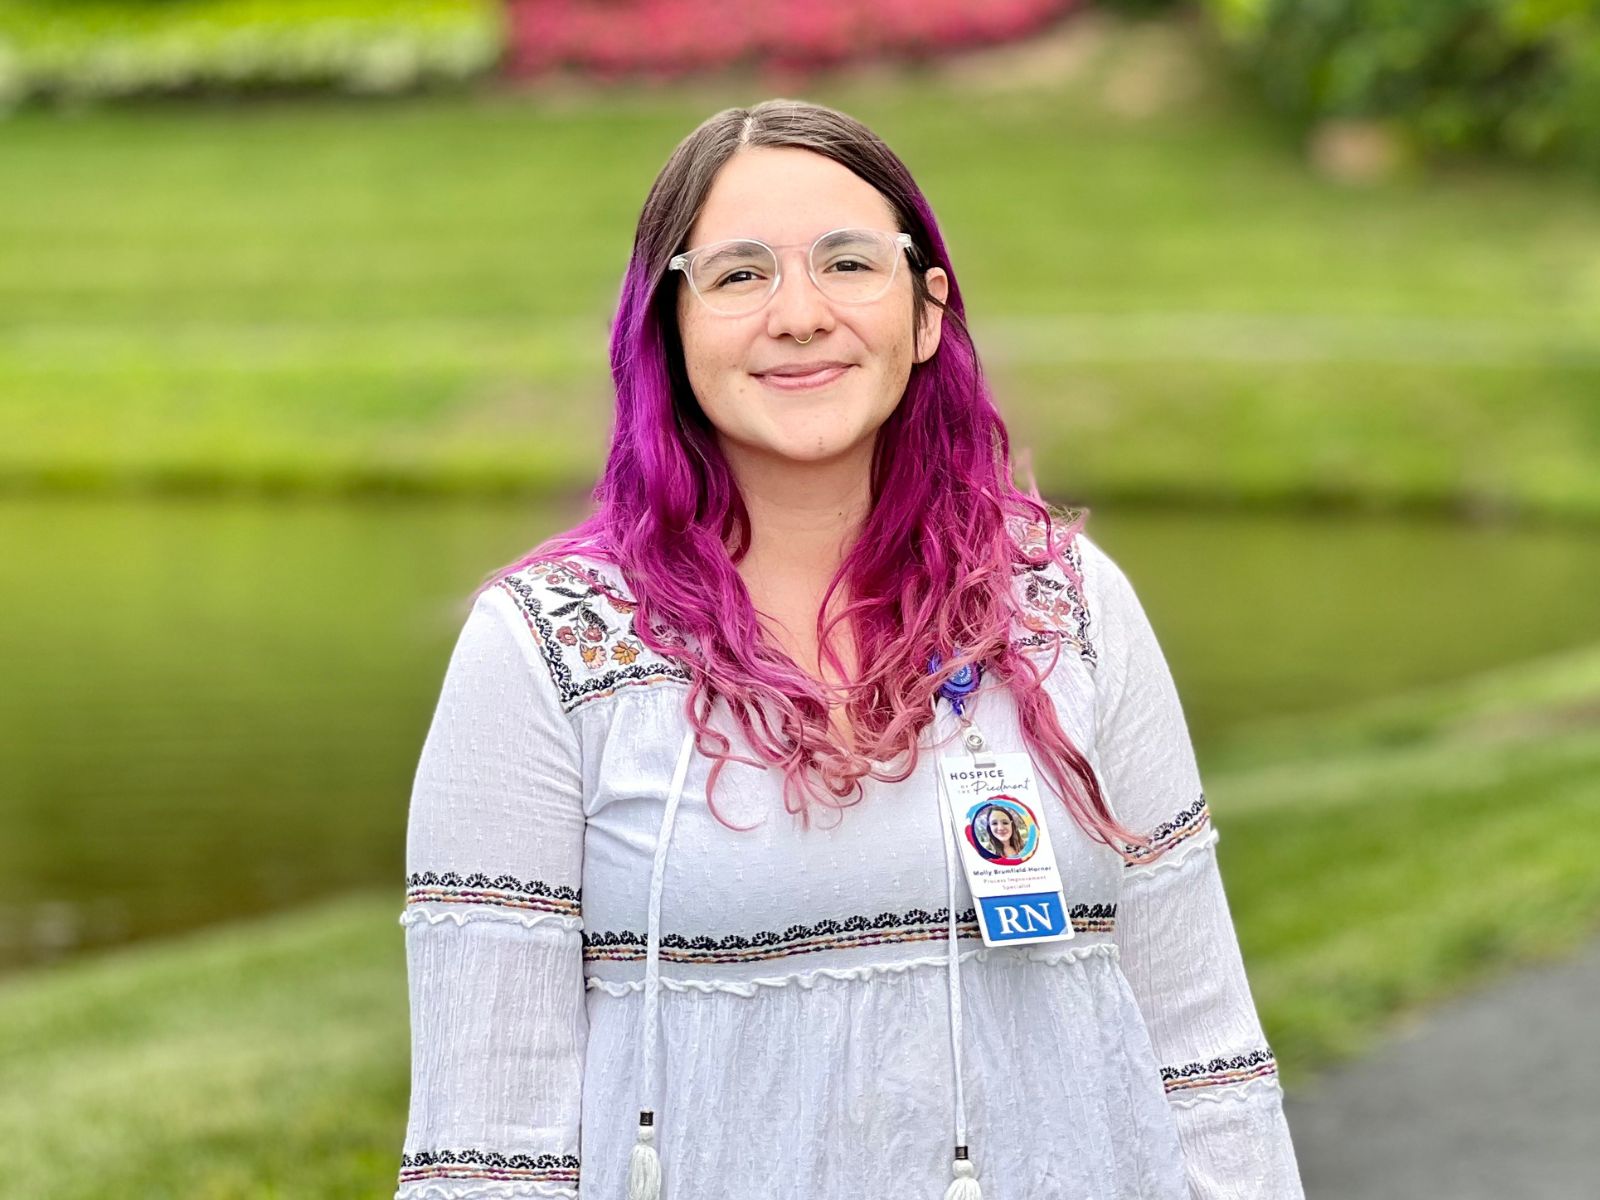 Molly Brumfield Horner smiling and standing in front of a pond with grass and a sidewalk.